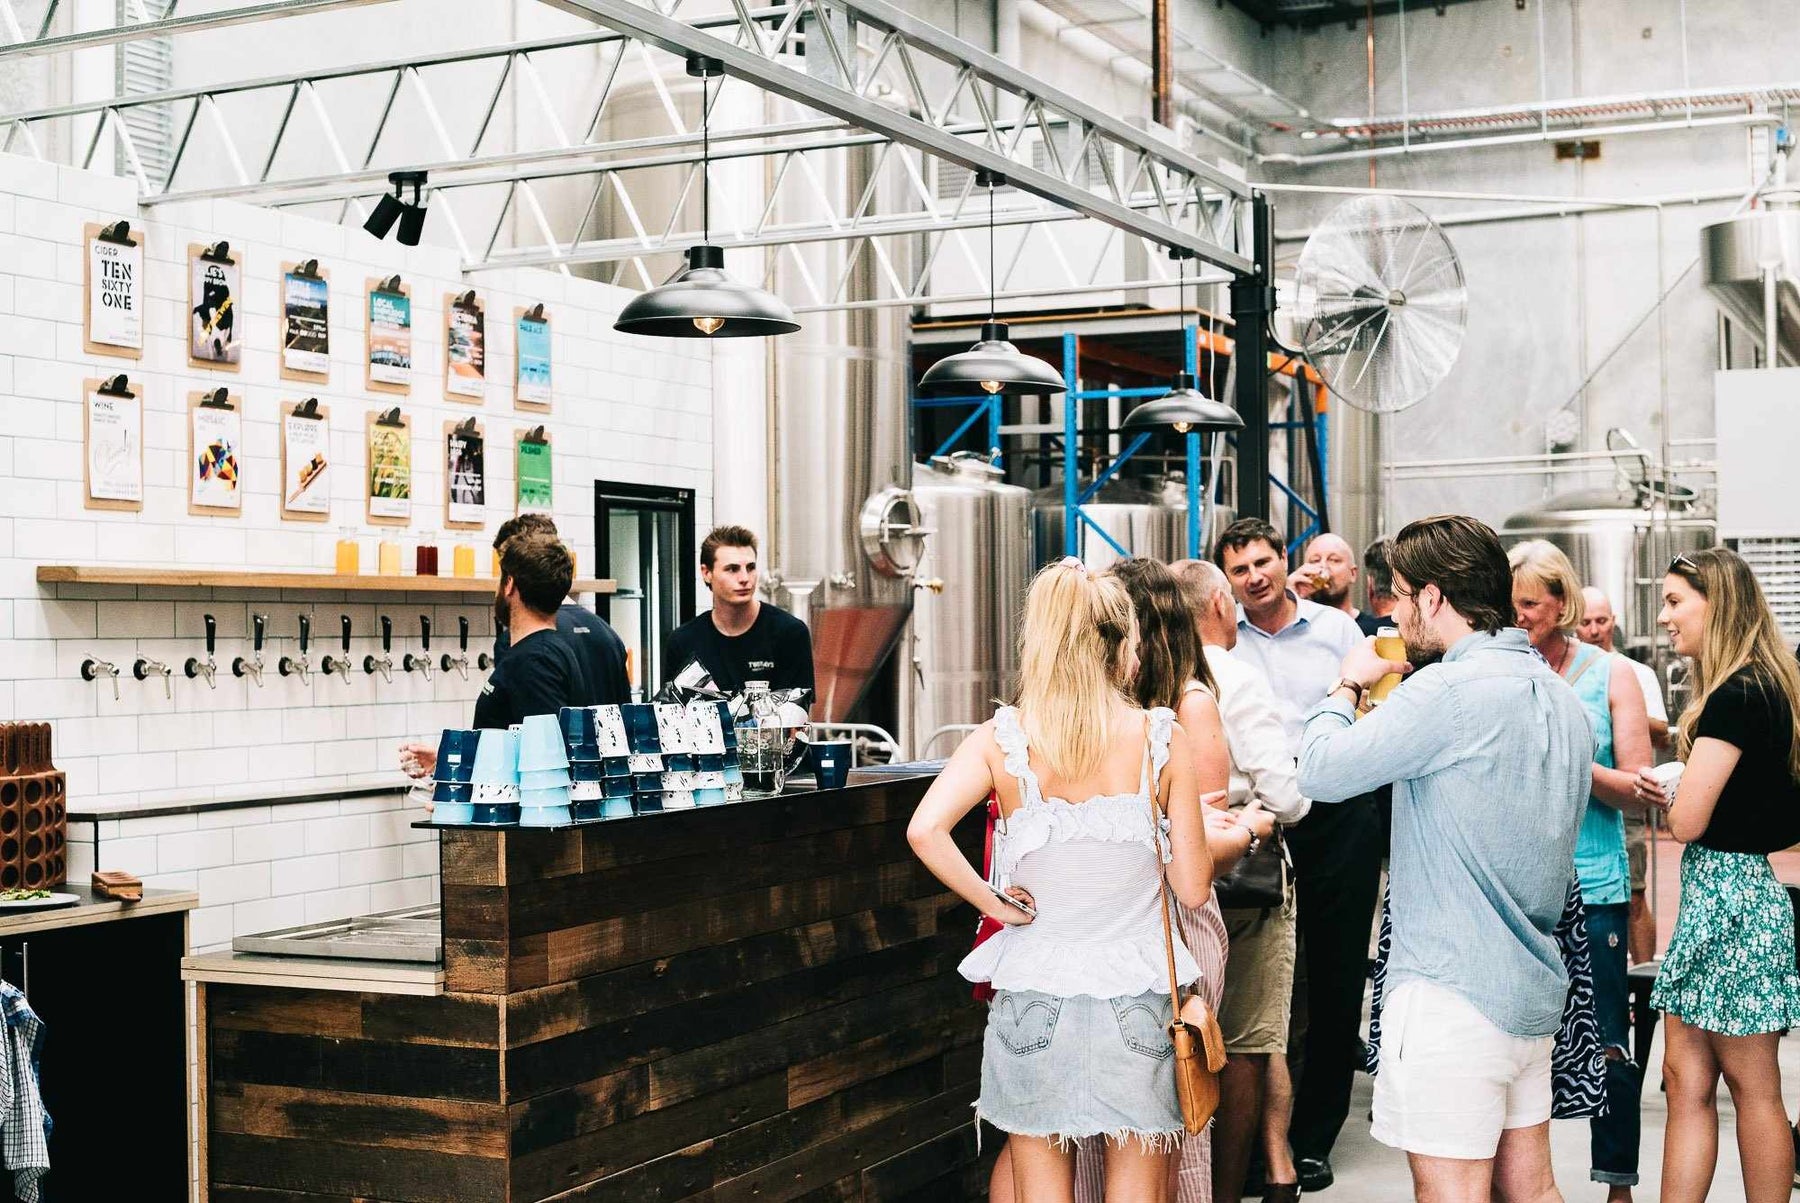 TwoBays Brewing Co. Introduces Australia's First Dedicated Gluten-Free Craft Beer Taproom